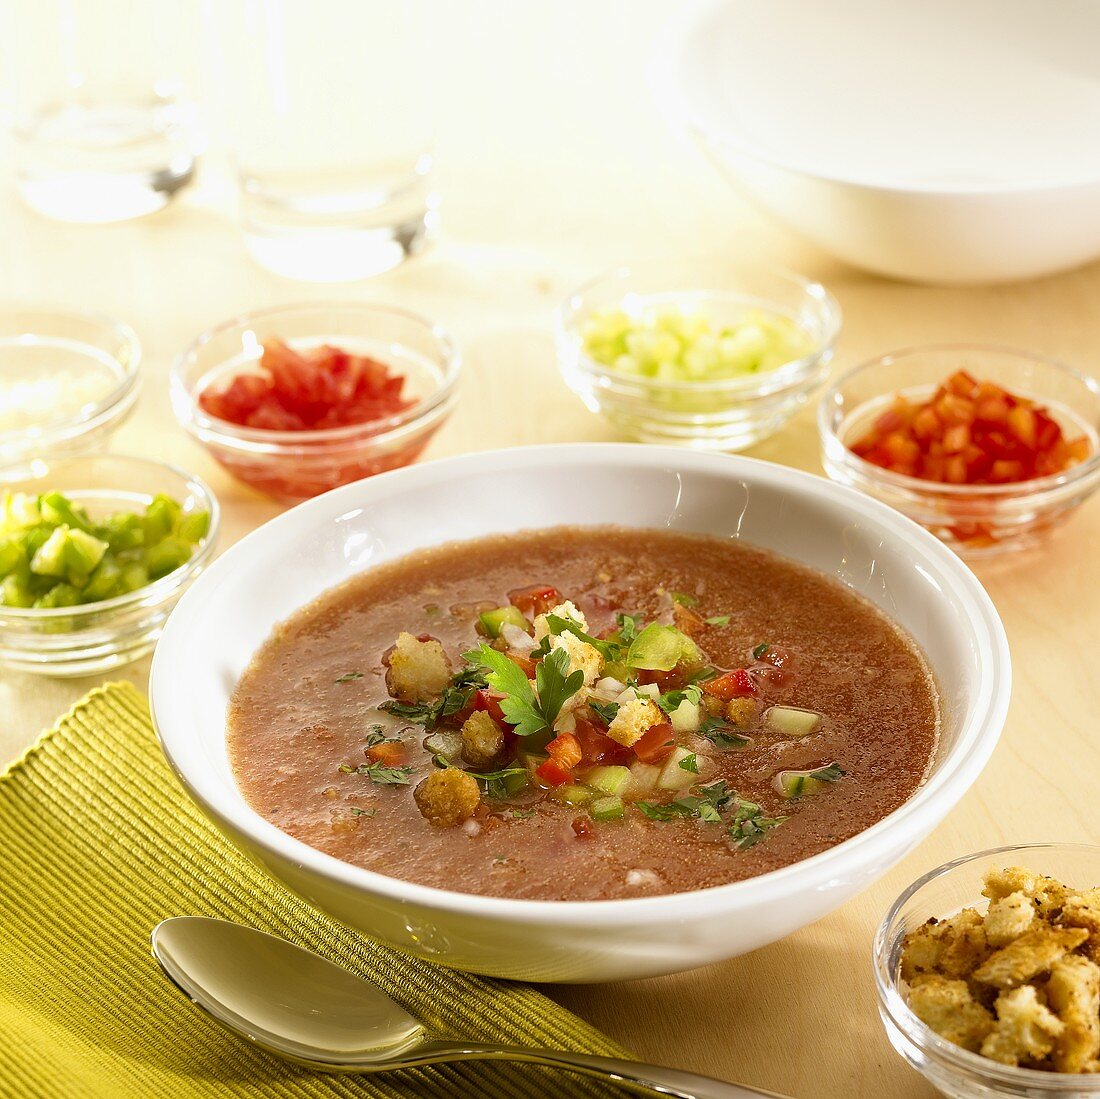 A Bowl of Gazpacho with Ingredients